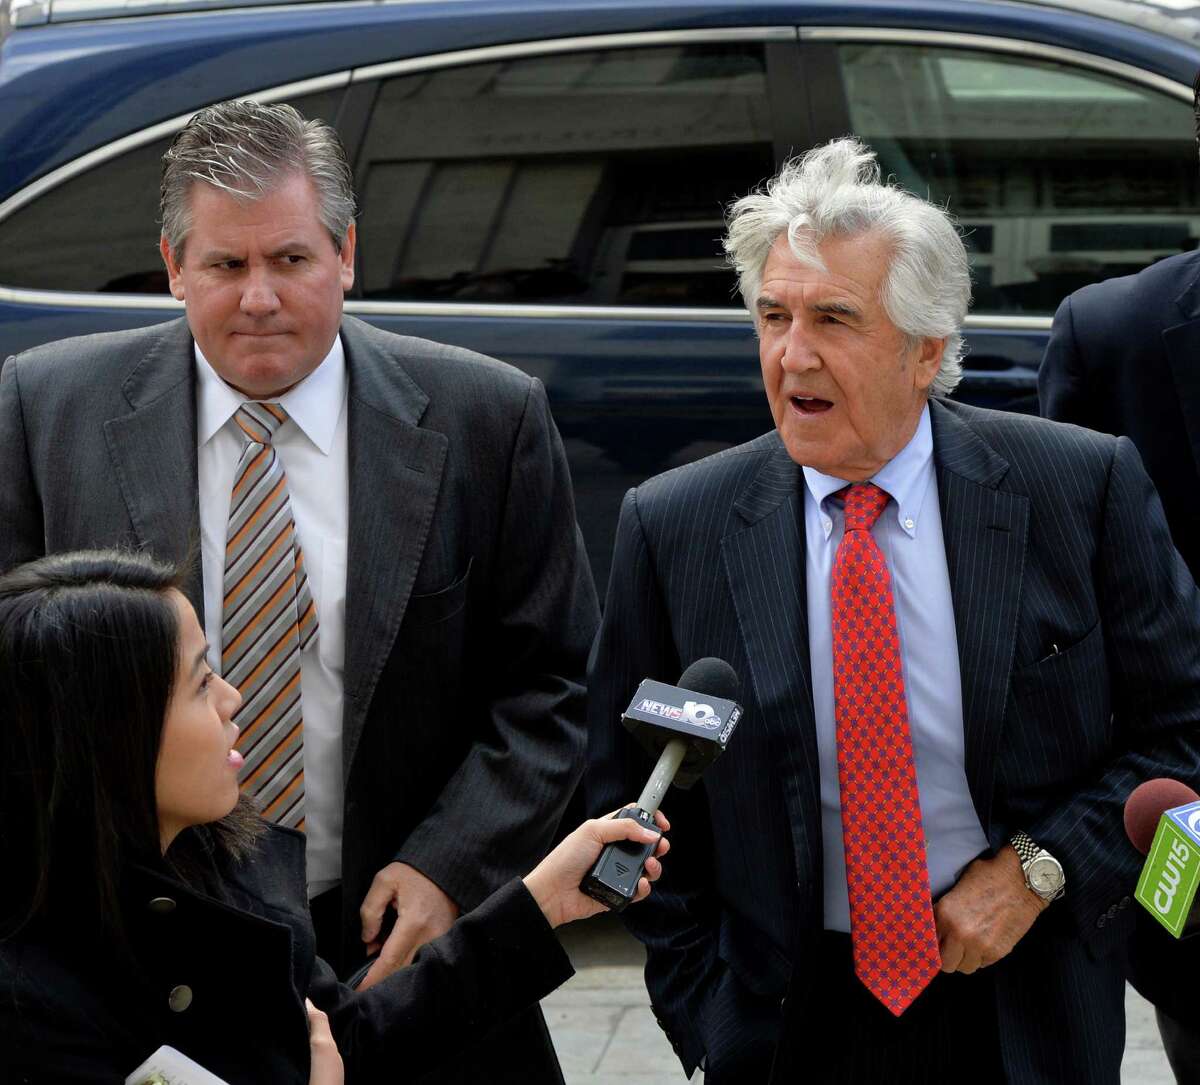 Former state Senate Majority Leader Joseph L. Bruno, enters the James T. Foley U.S. Courthouse under the watchful eye of his son and attorney Ken Bruno, left, on Thursday May 8, 2014 in Albany, N.Y. (Skip Dickstein / Times Union) ORG XMIT: J=0509_bruno